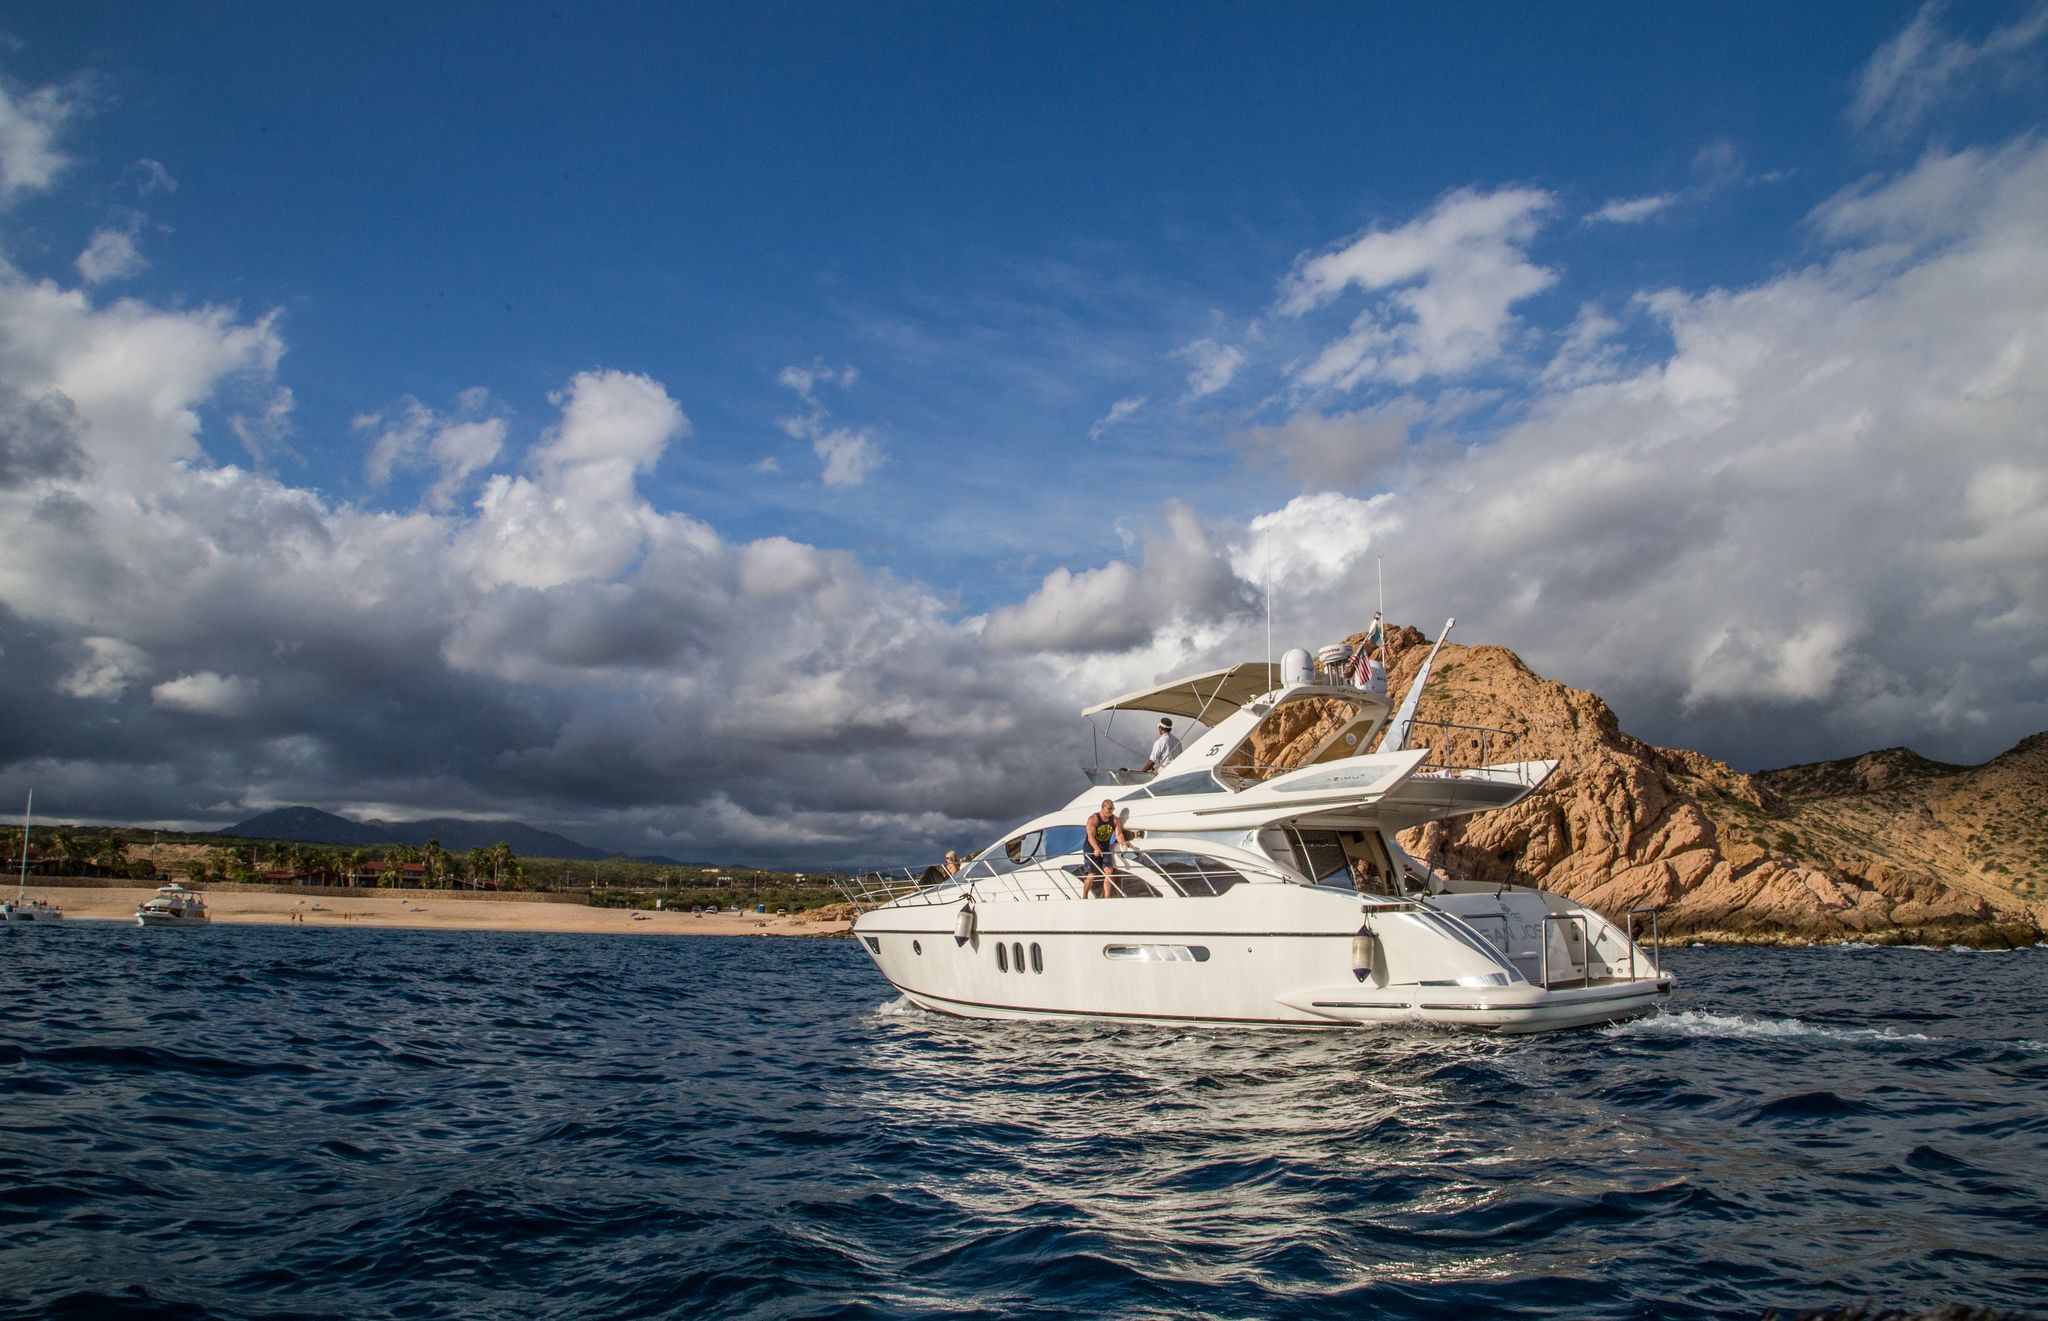 Cabo San Lucas Yachts Charters, Boat rentals, images pictures of yachts in cabo